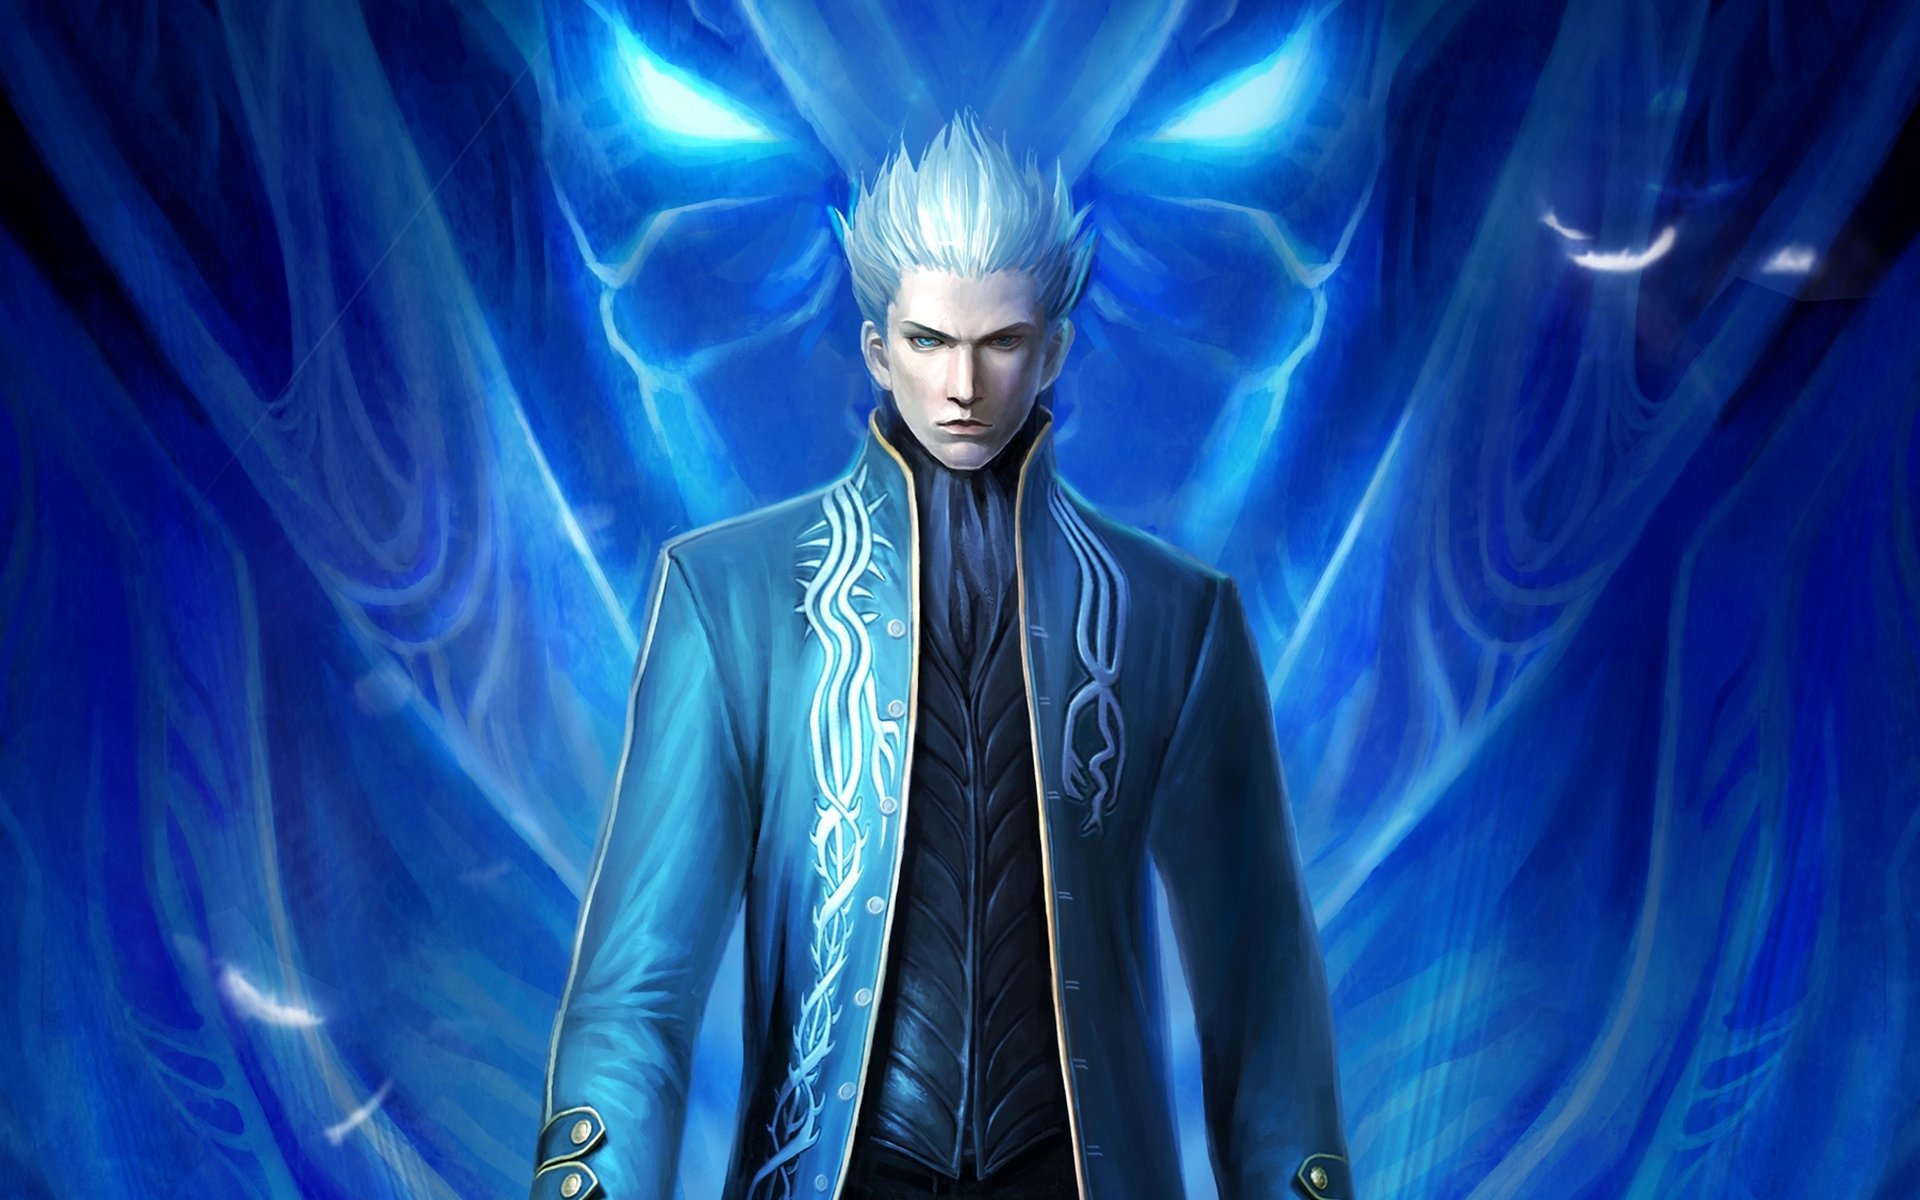 Image - Devil-may-cry-3-dmc-game-wallpapers-special-edition-vergil ... Vergil Devil May Cry 3 Wallpaper